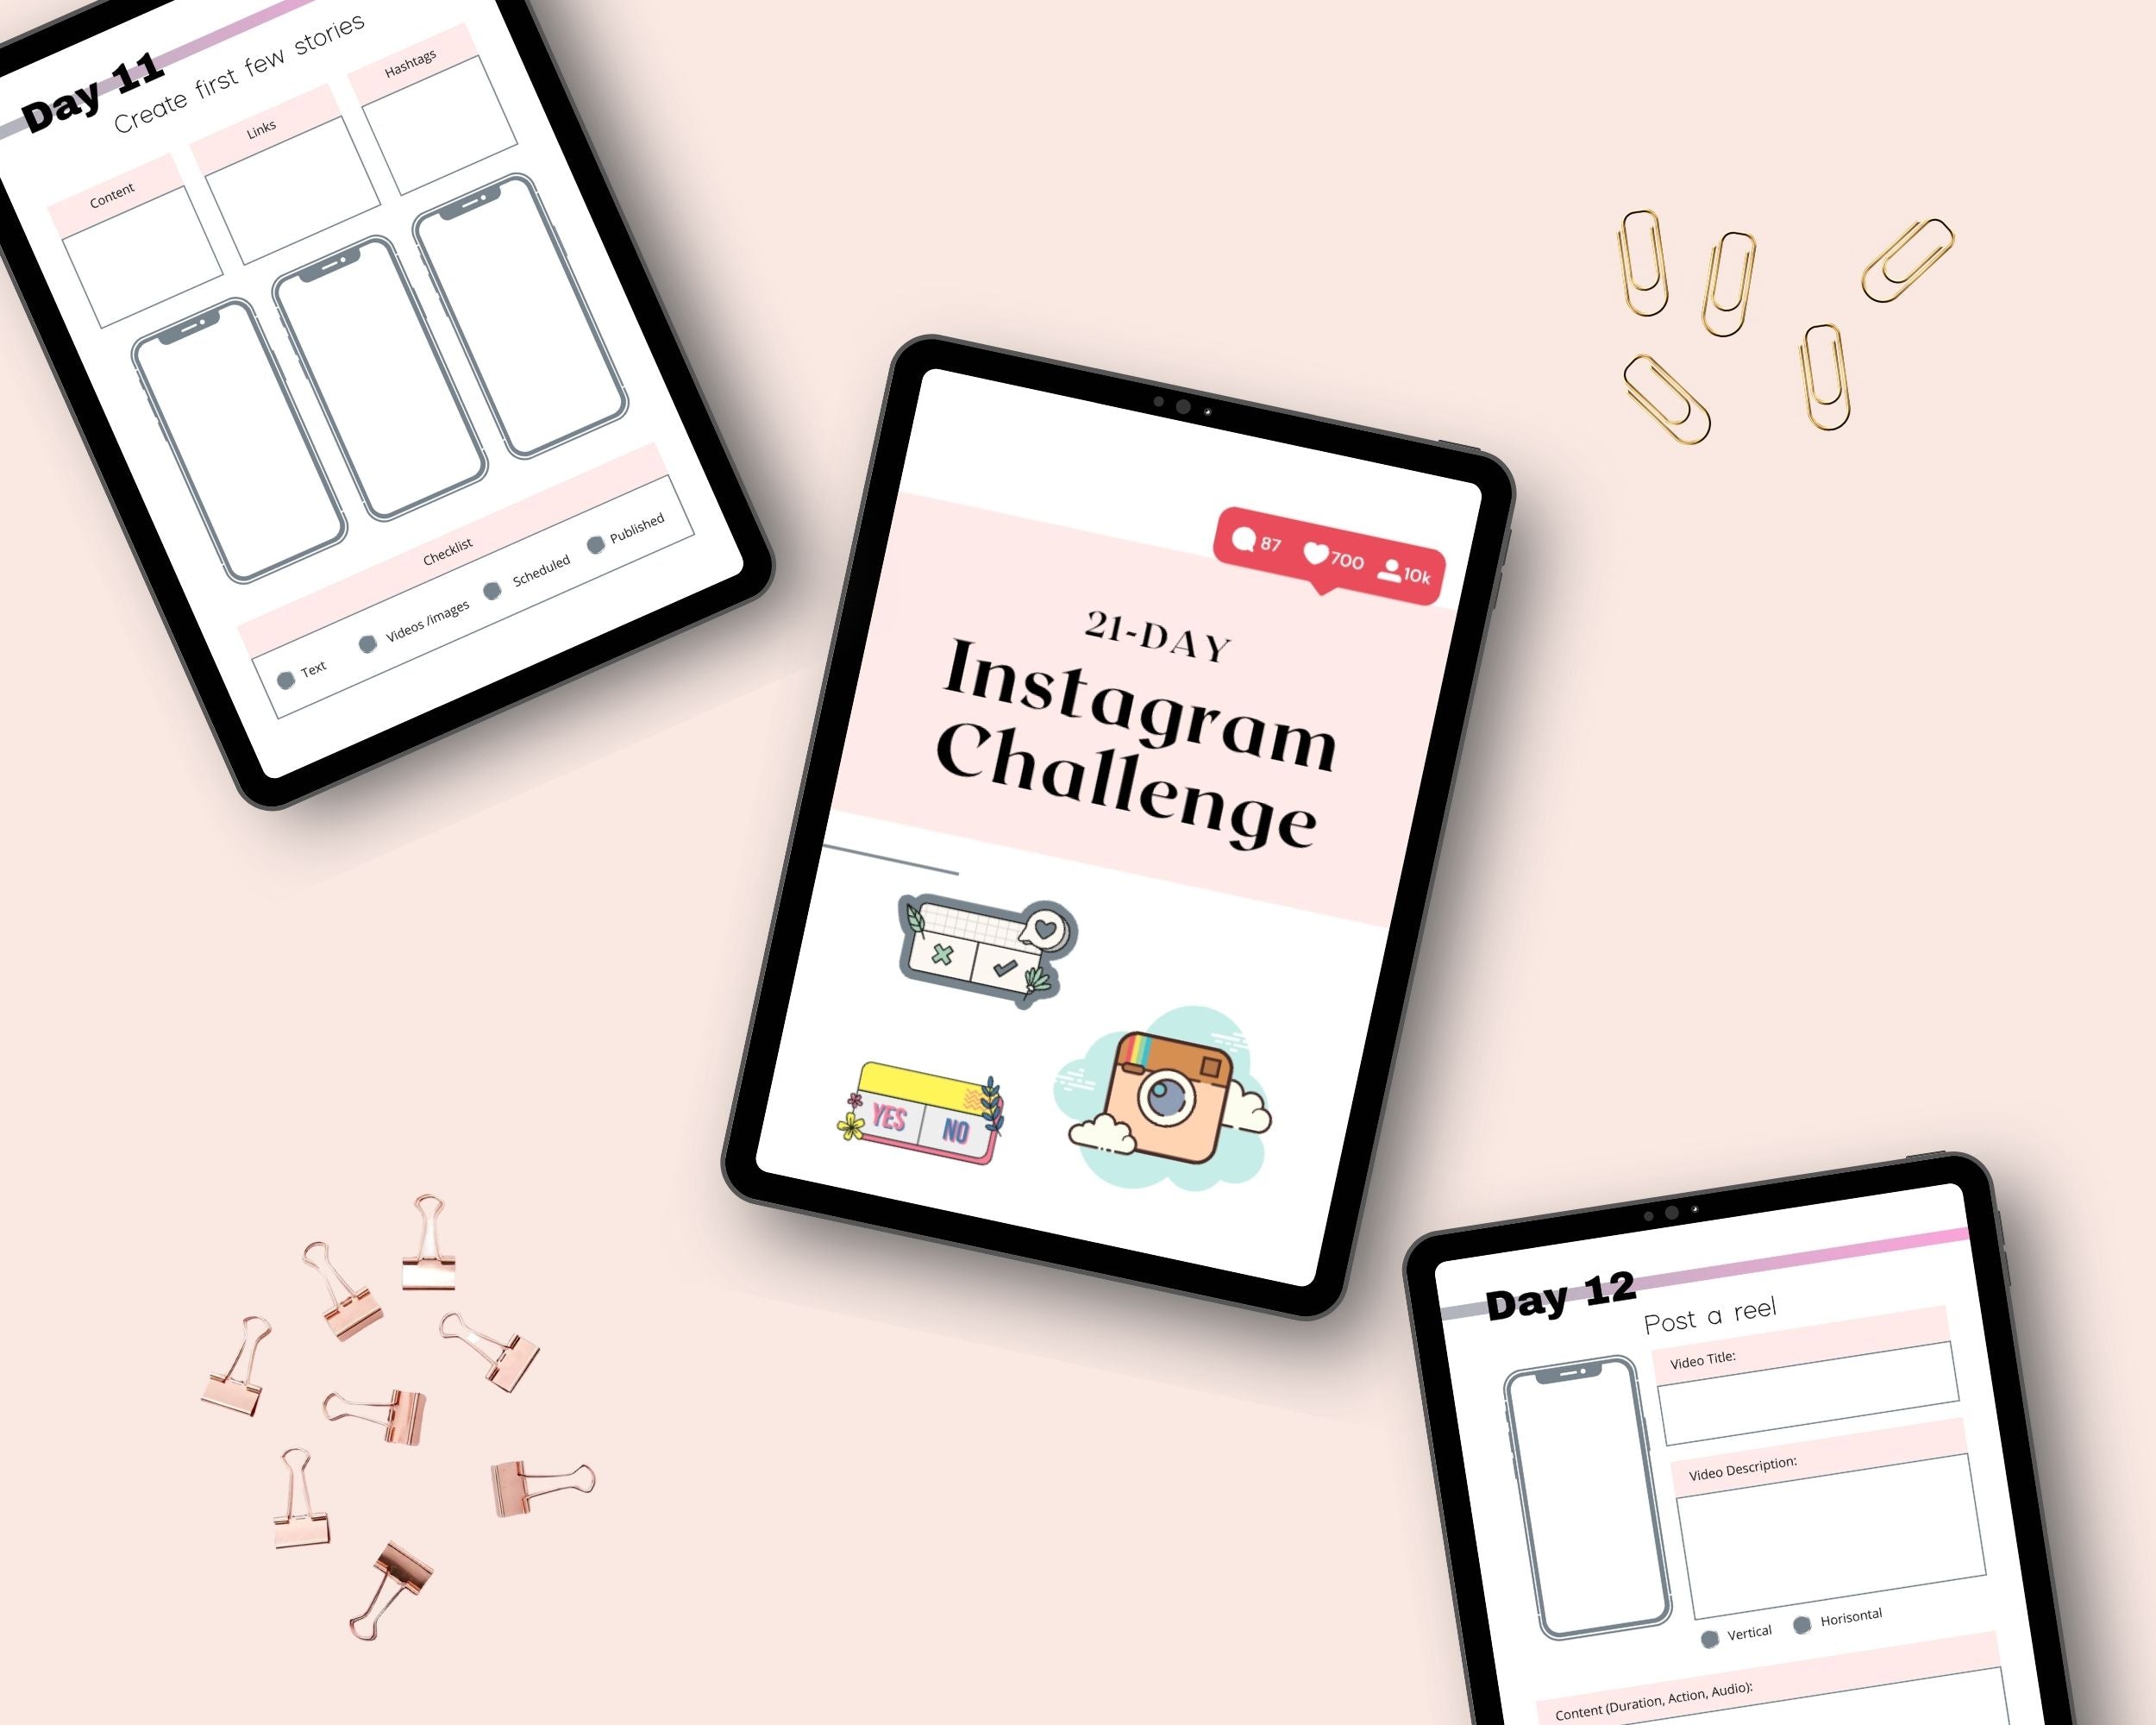 21 Day Instagram Challenge | Editable Canva Template A4 Size